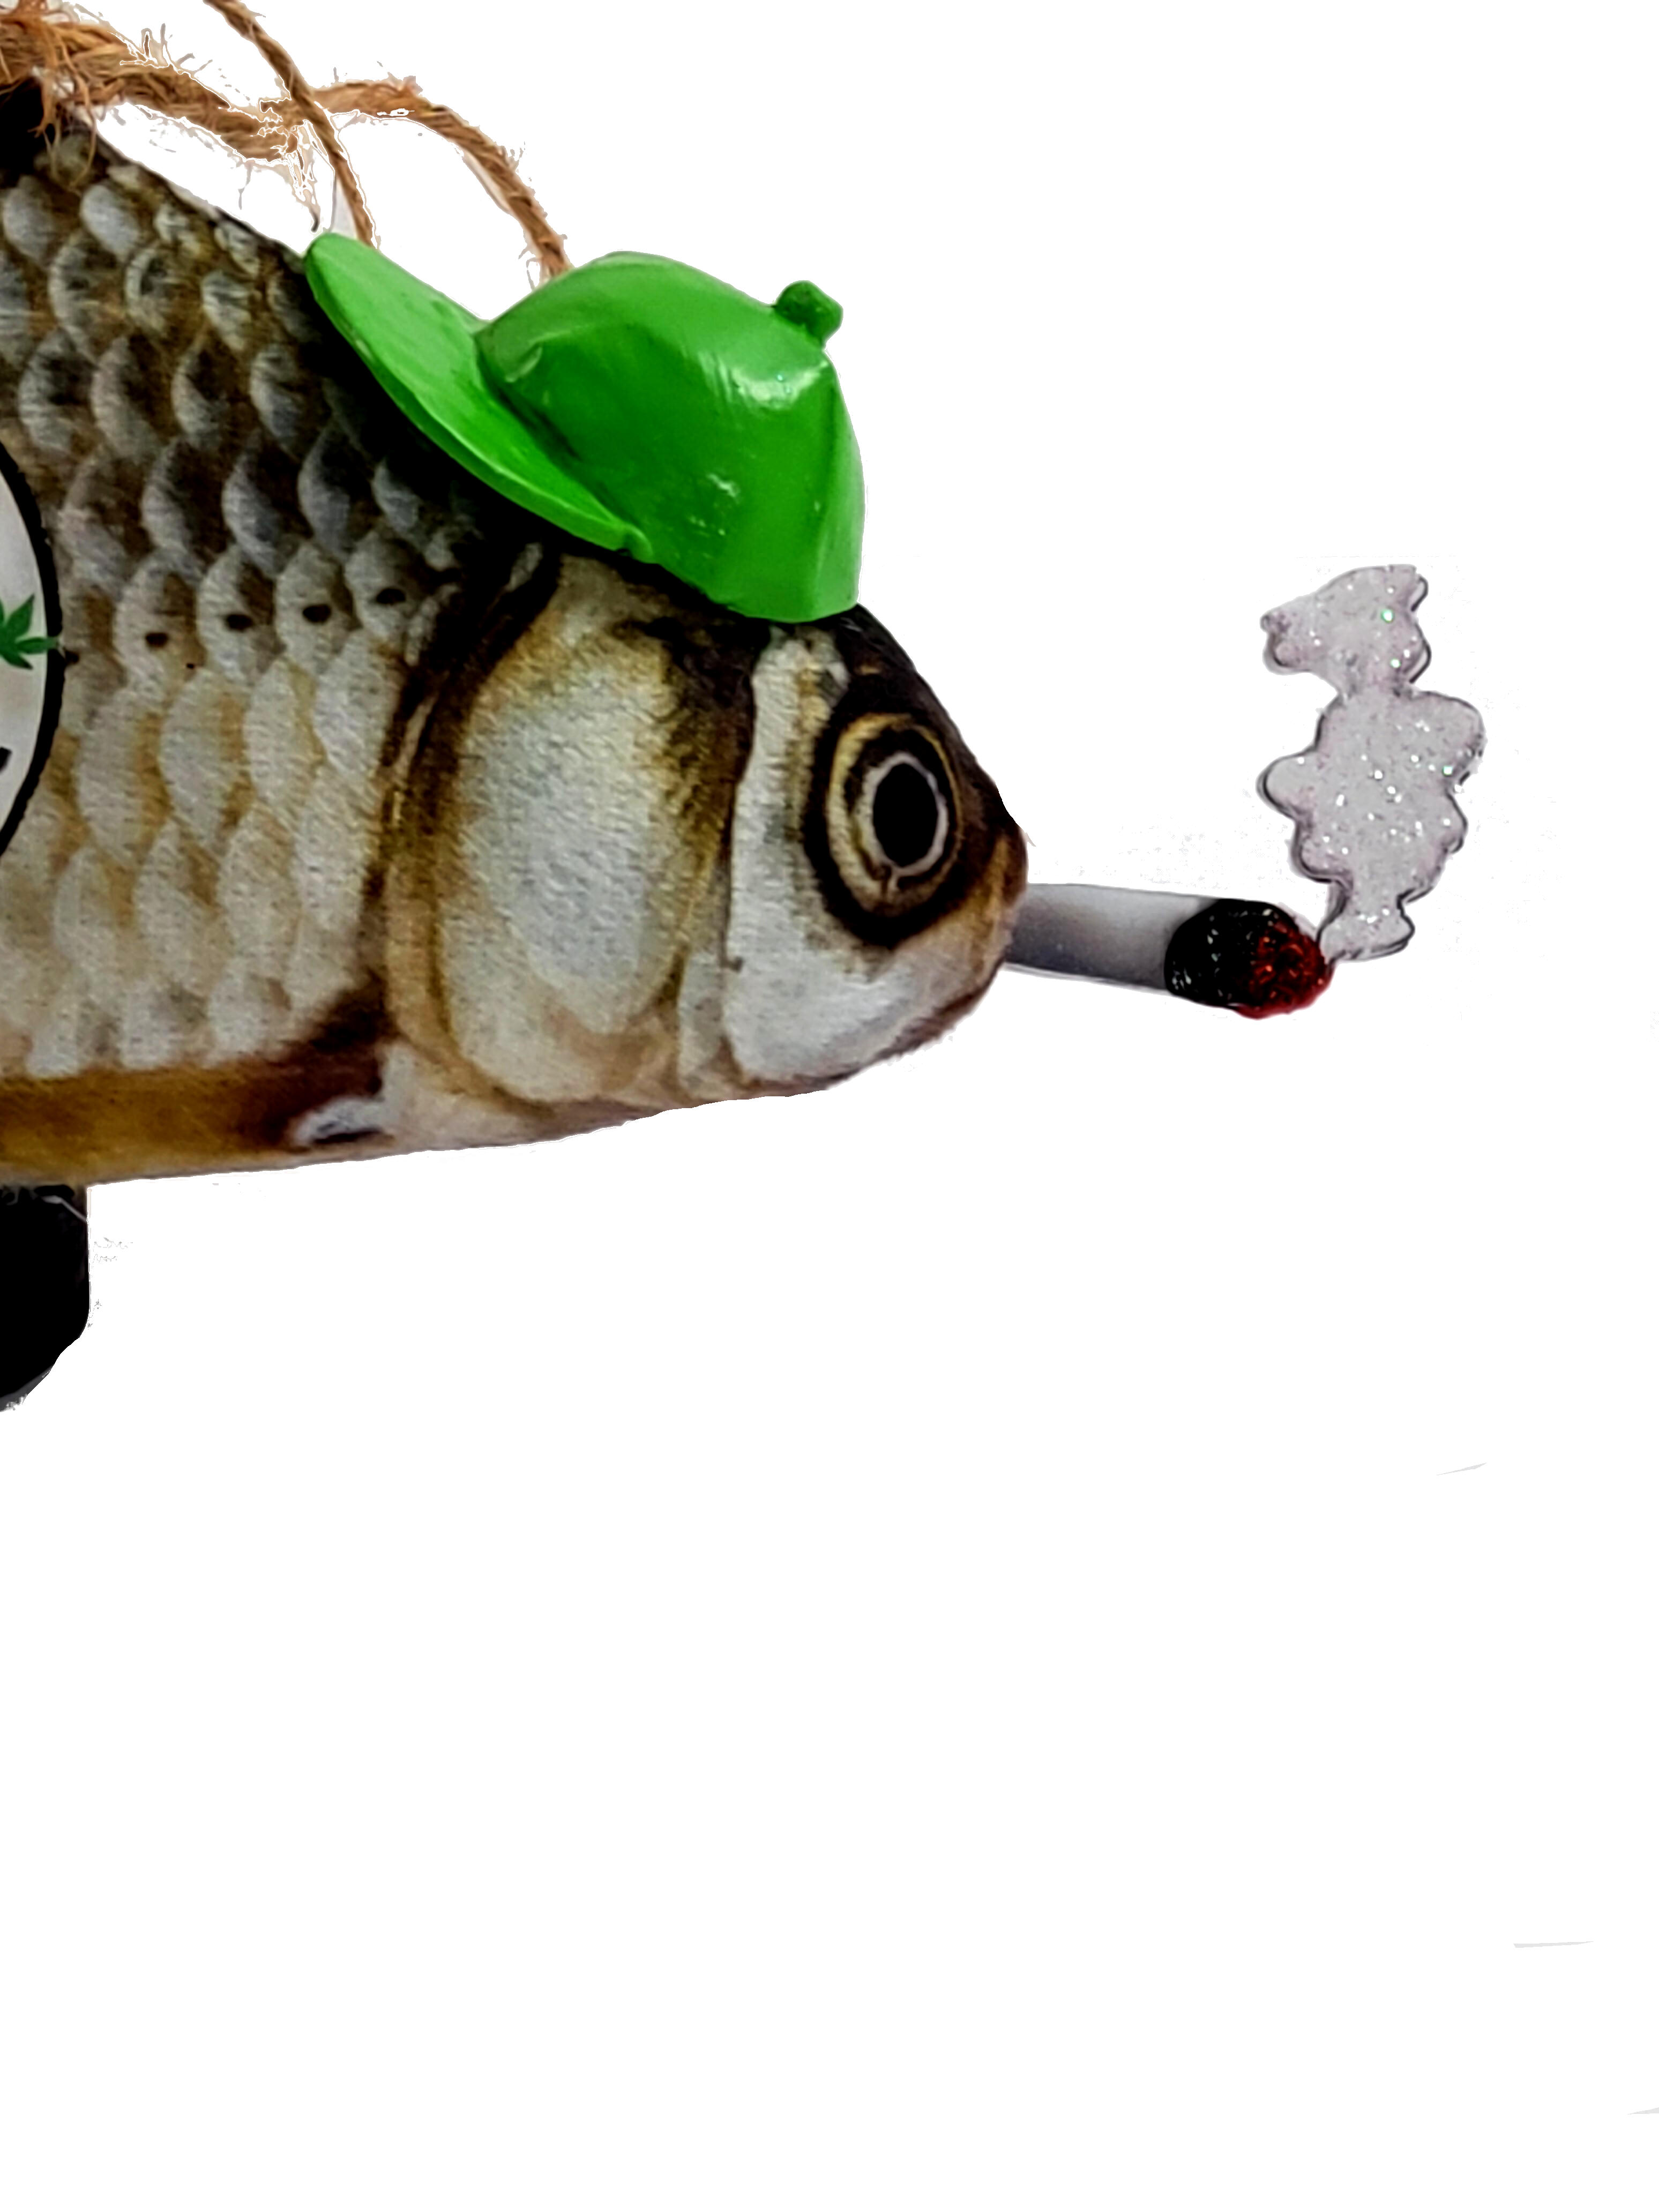 https://d1q8o8ch5u48ua.cloudfront.net/images/detailed/679/clsoeup_of_cannabis_fish_with_green_hat_smoking_a_doobie.jpg?t=1634797293